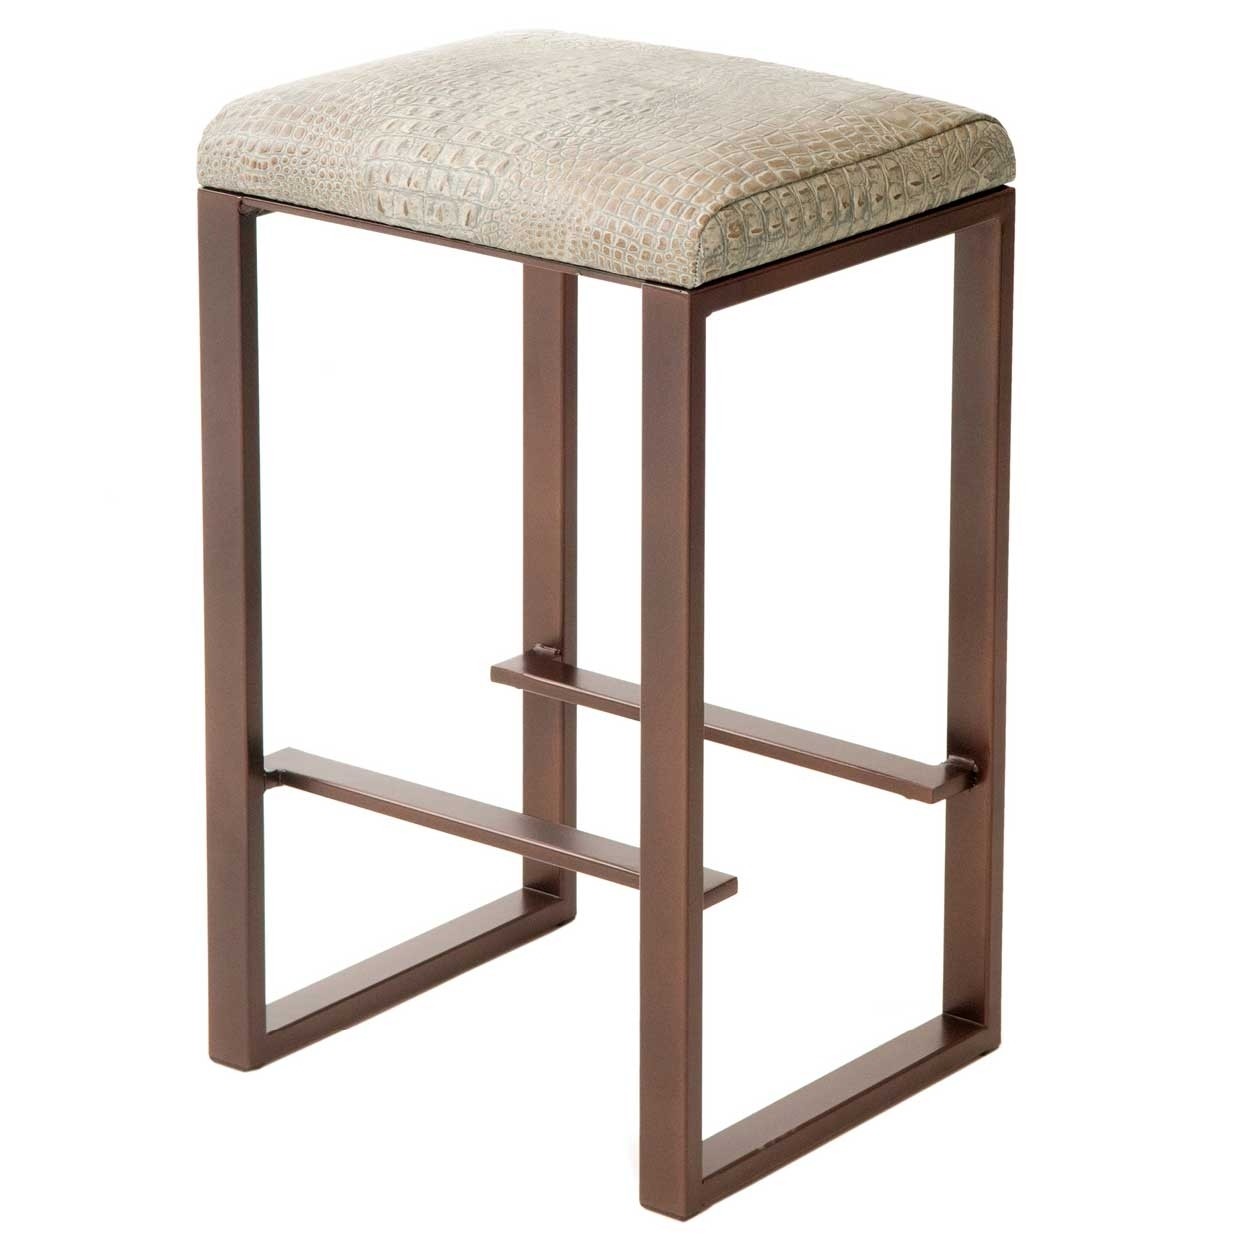 Pictured here is the clement backless counter stool